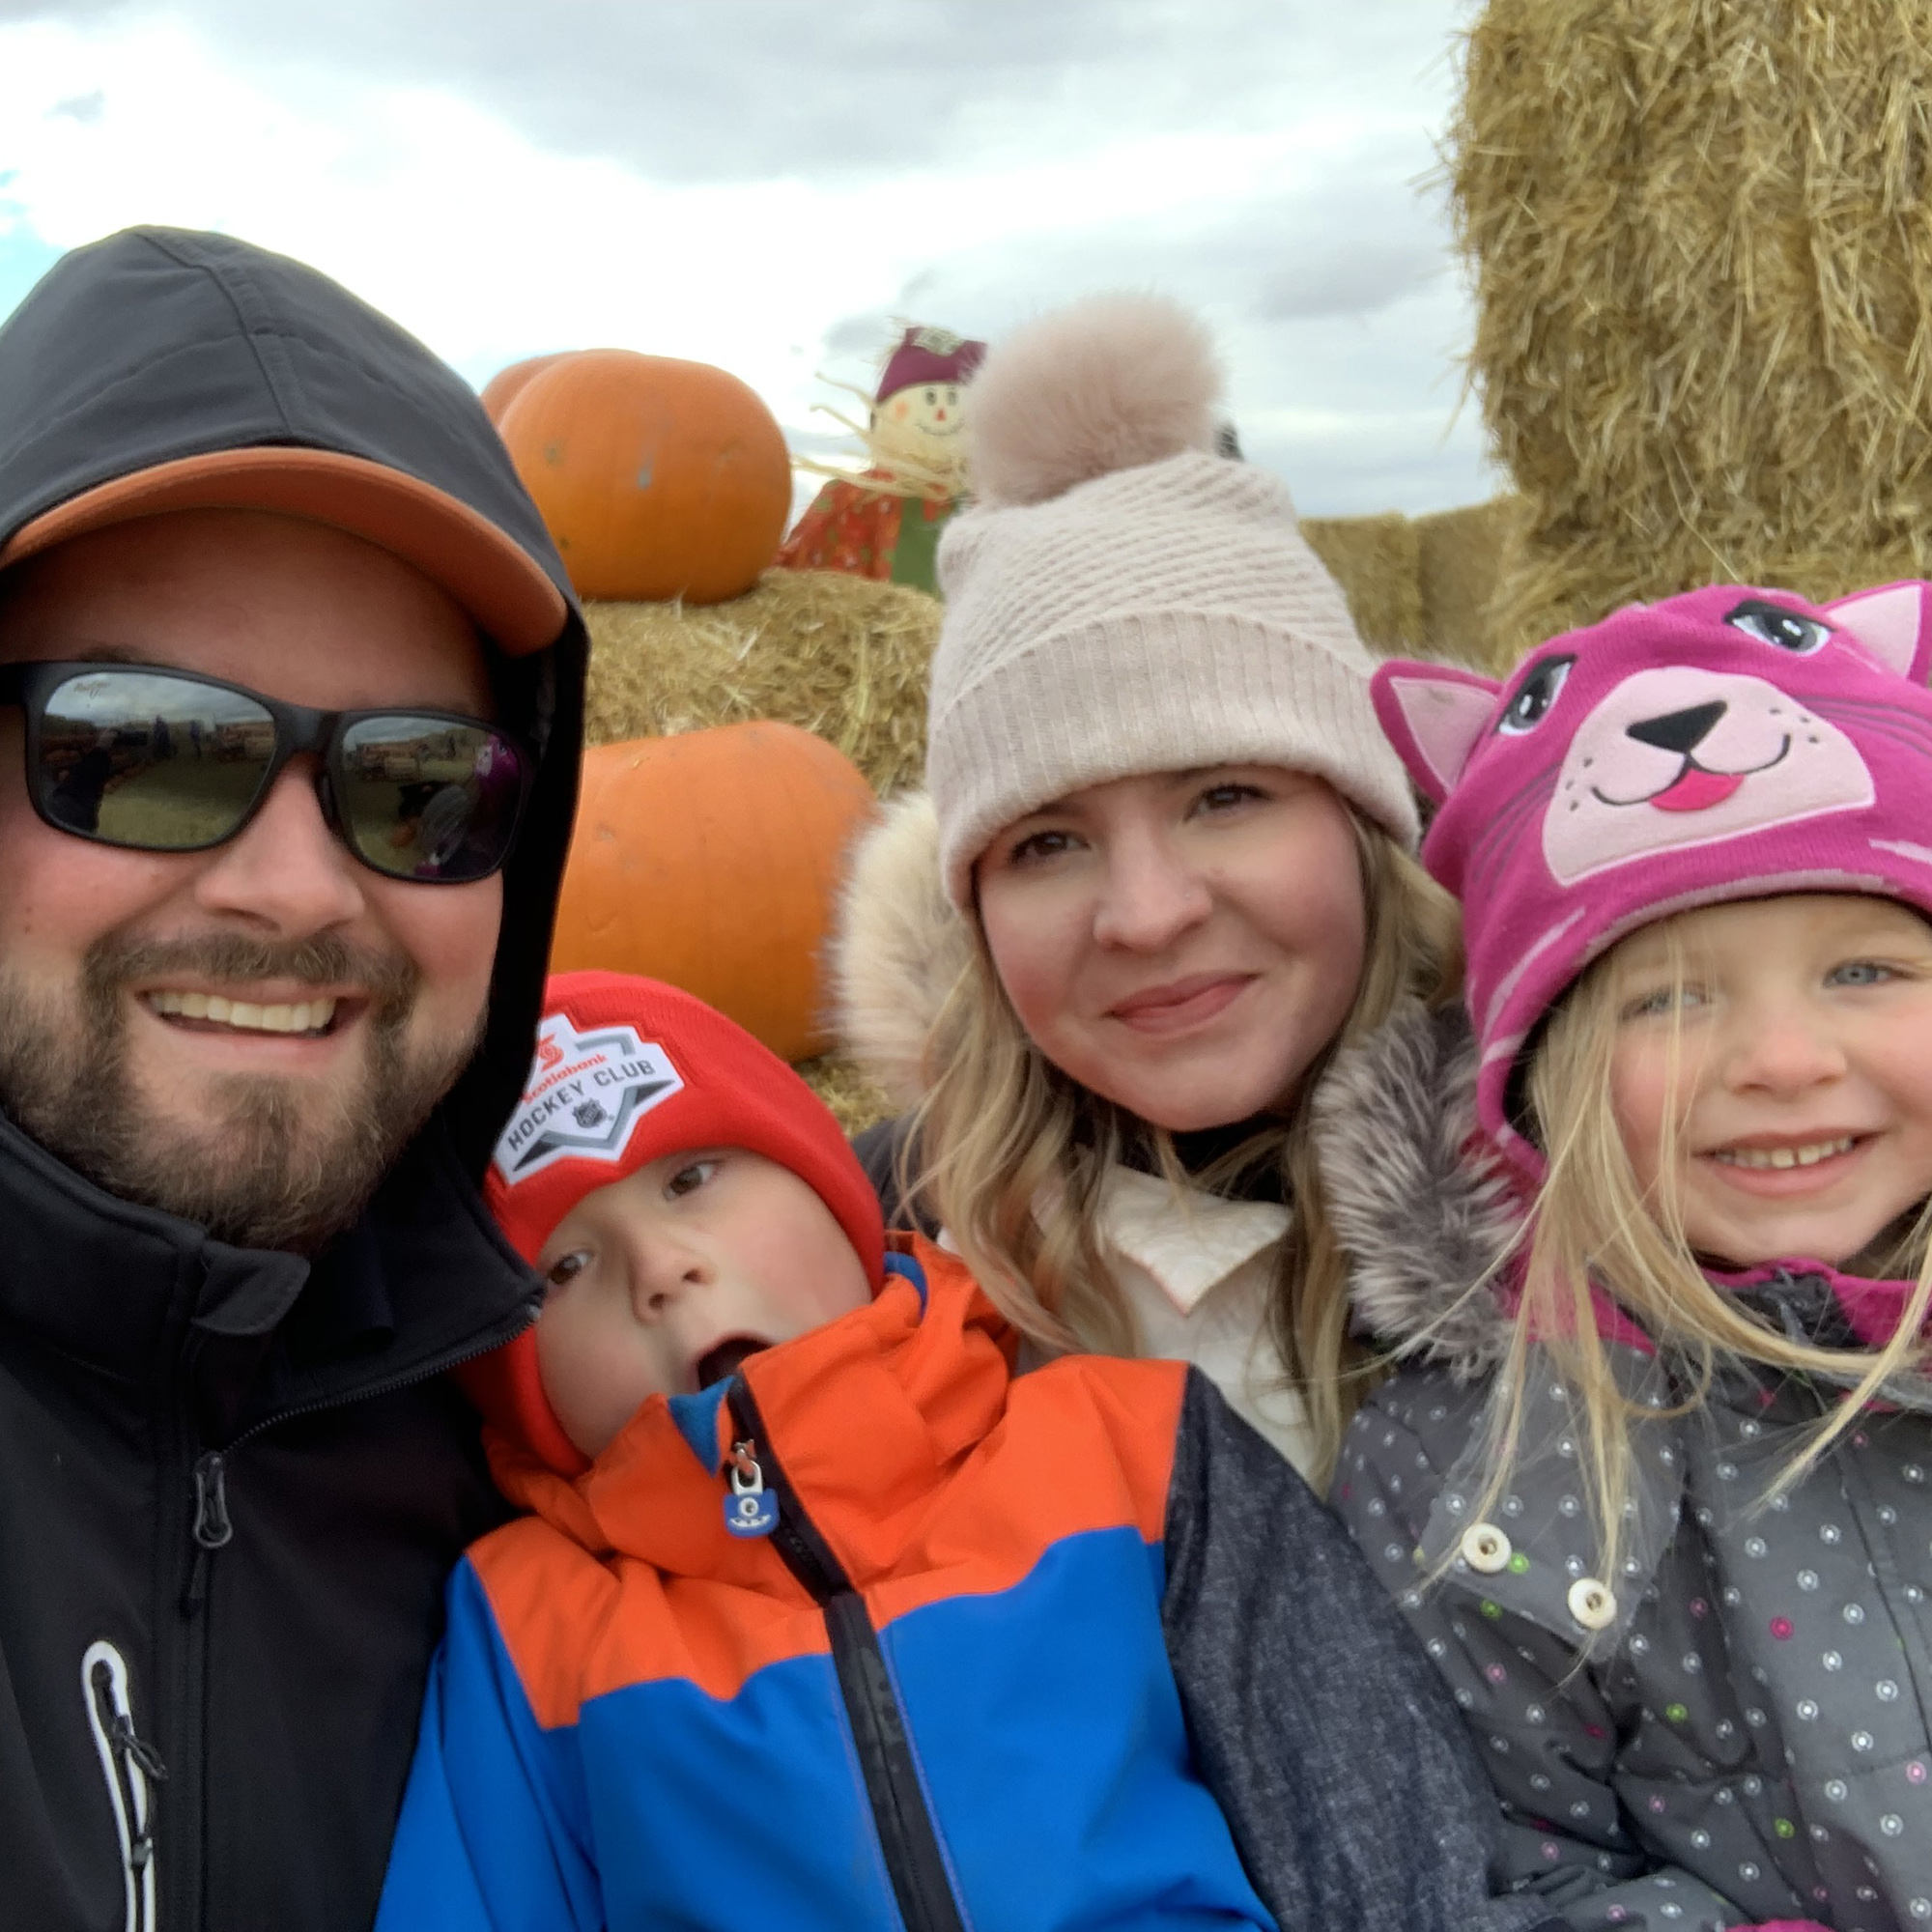 The Goldings at a Pumpkin Patch